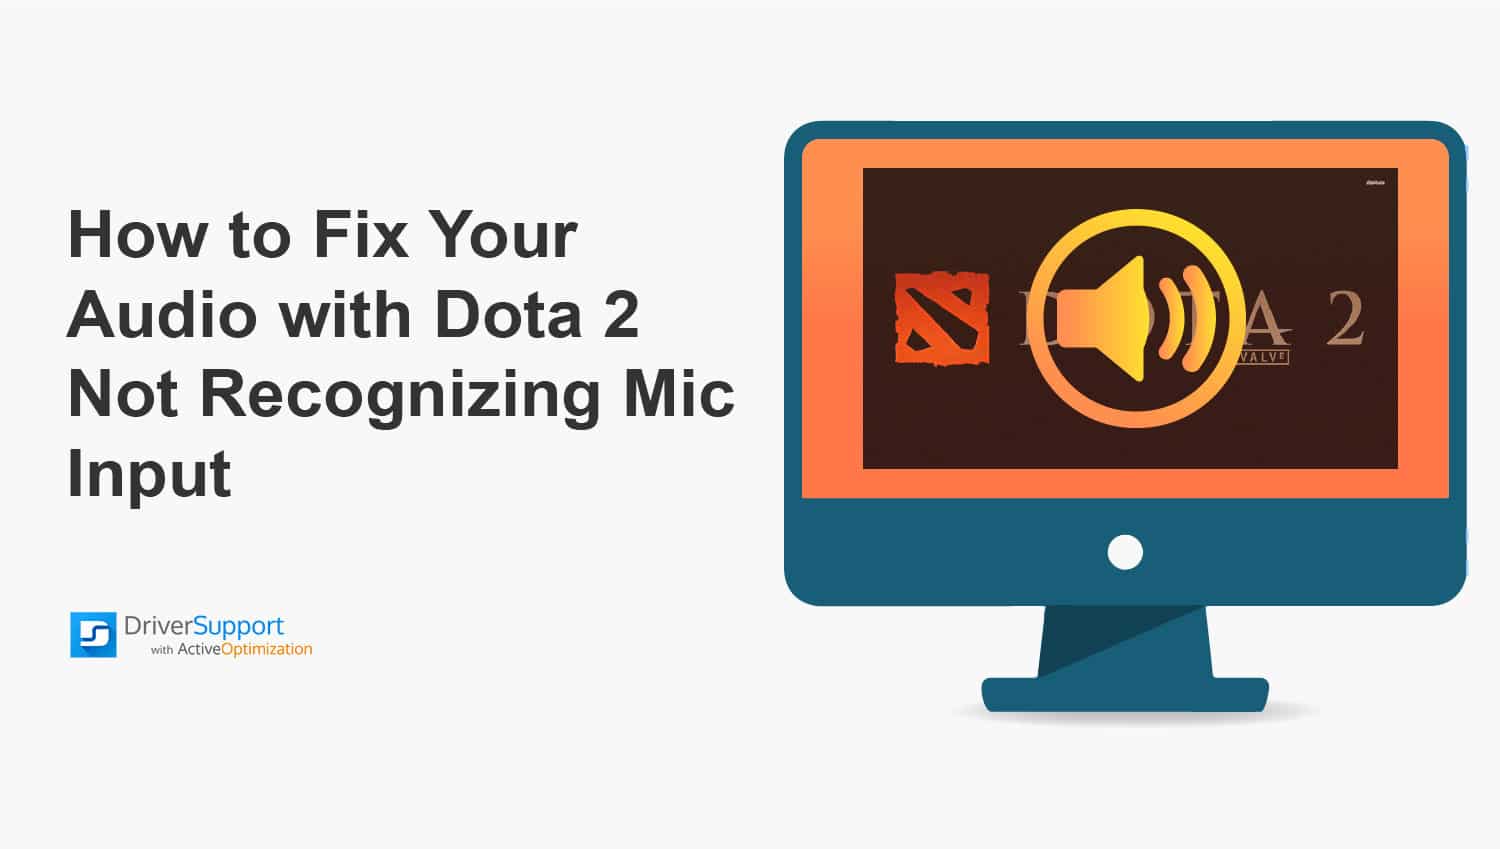 blood unforgivable manager How to Fix Your Audio Issue with Dota 2 Not Recognizing Mic Input